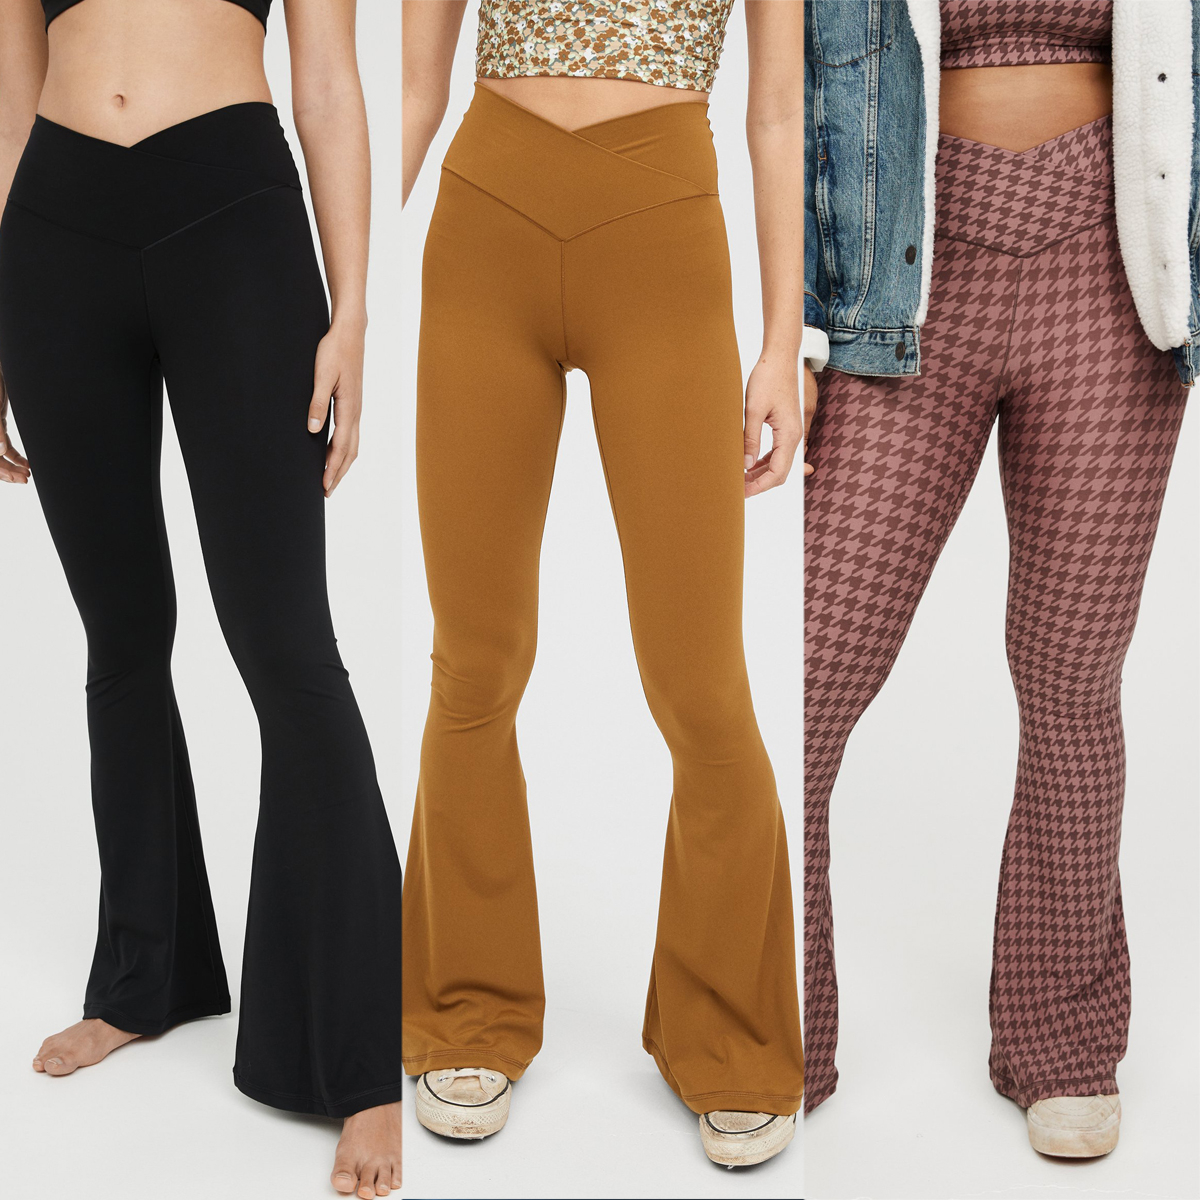 These Comfy Flare Leggings Are on Sale at